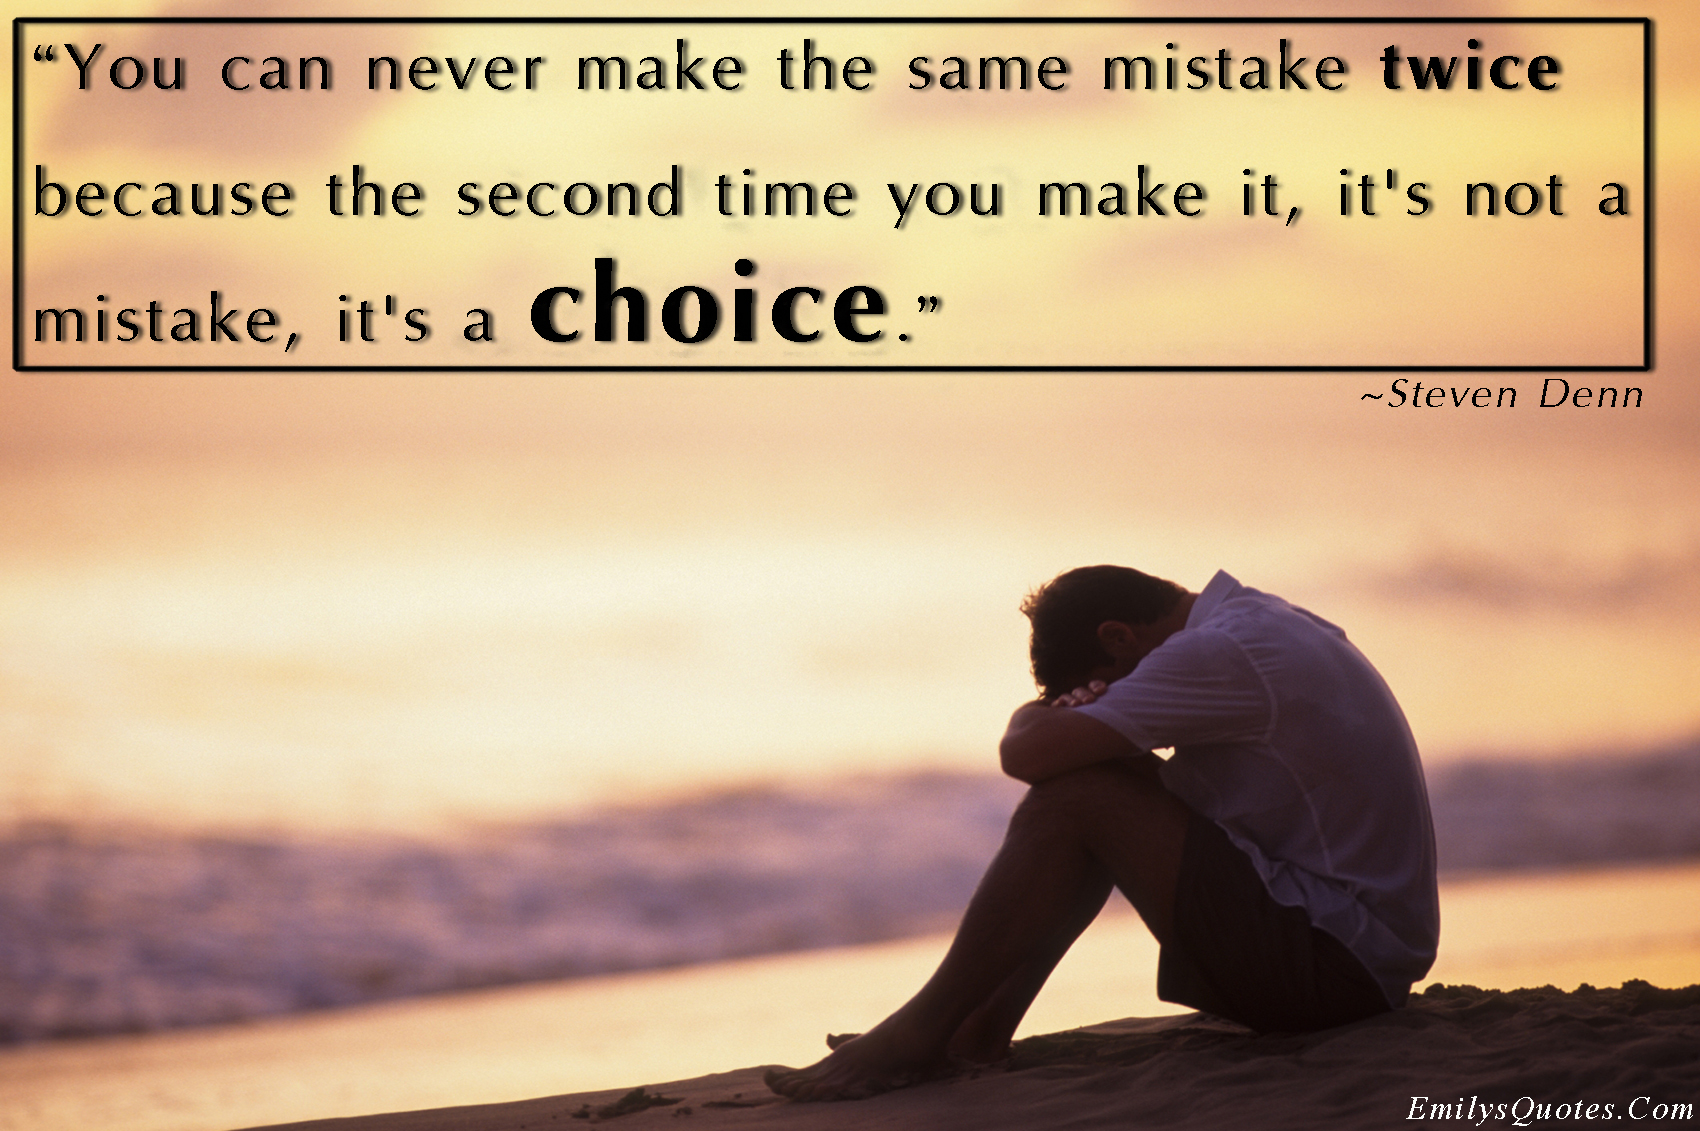 You can never make the same mistake twice because the second time you